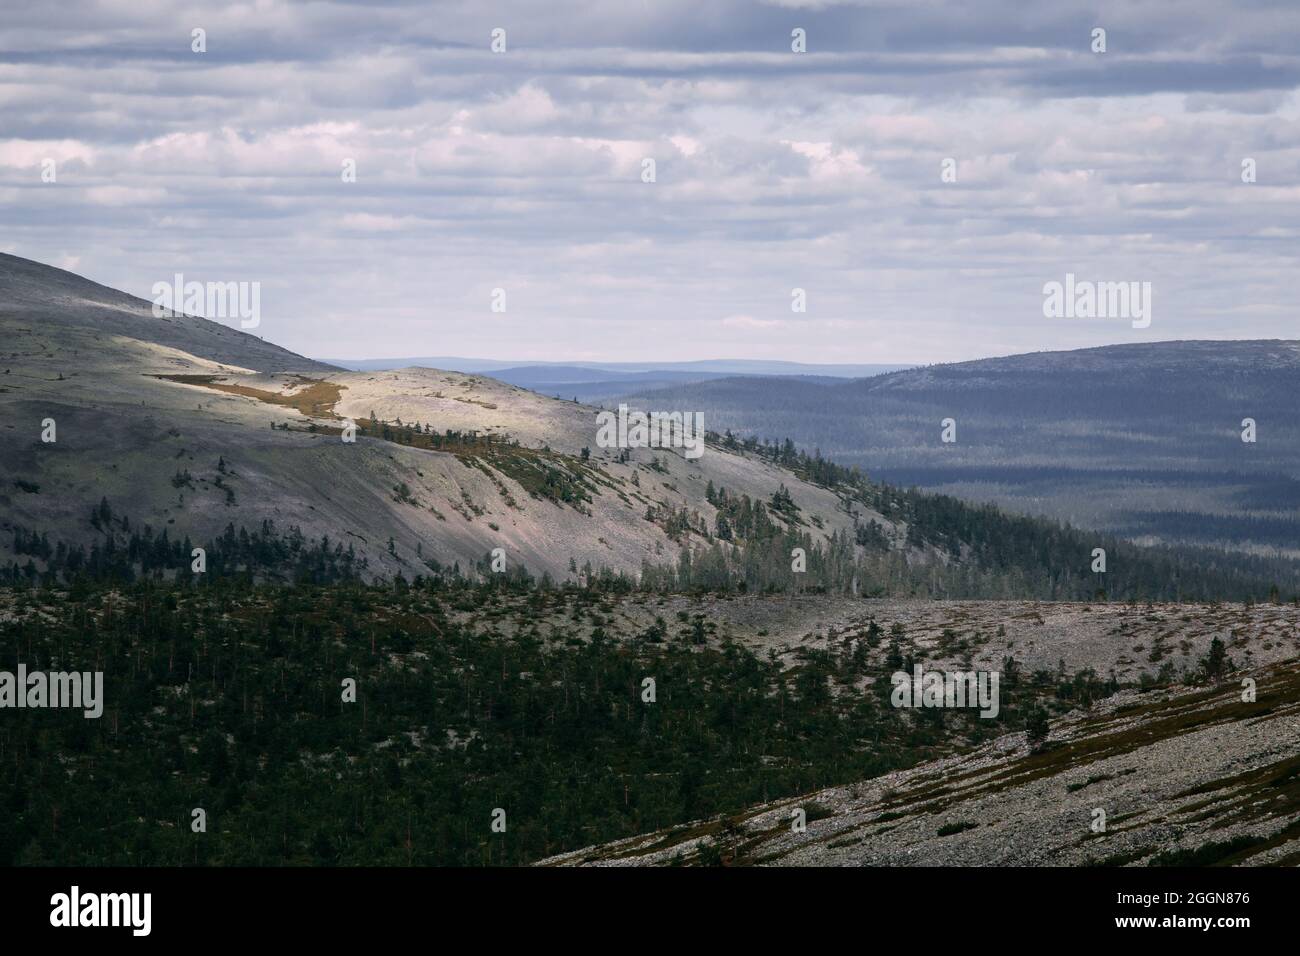 Peaceful landscape in the mountains of Lapland, with patches of sunlight on a fell and clouds in the sky. Stock Photo